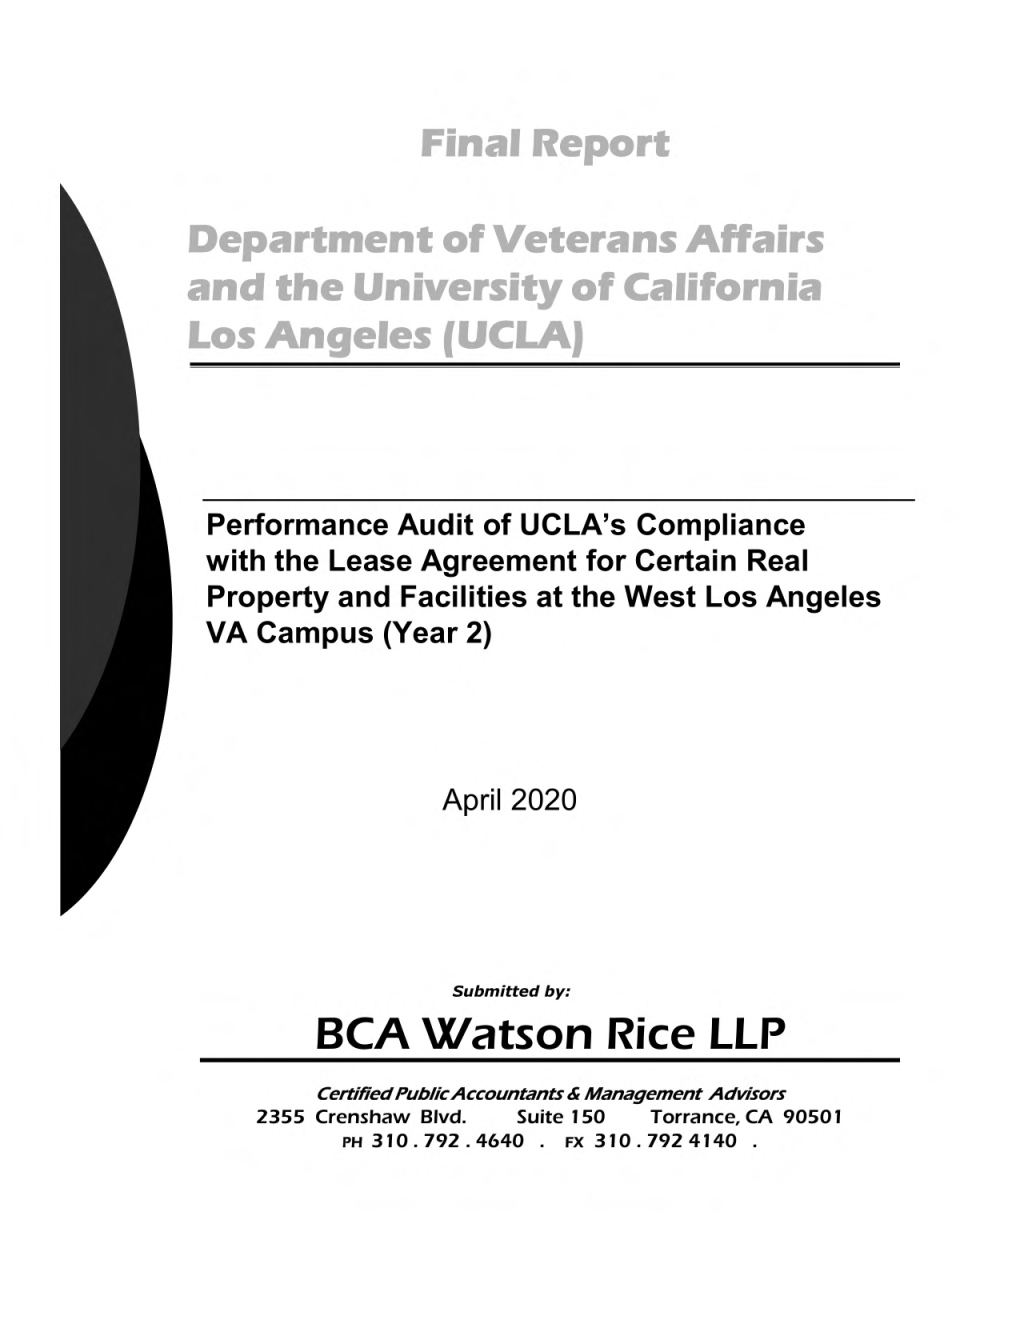 Final Report Department of Veterans Affairs and the University of California Los Angeles (UCLA) BCA Watson Rice